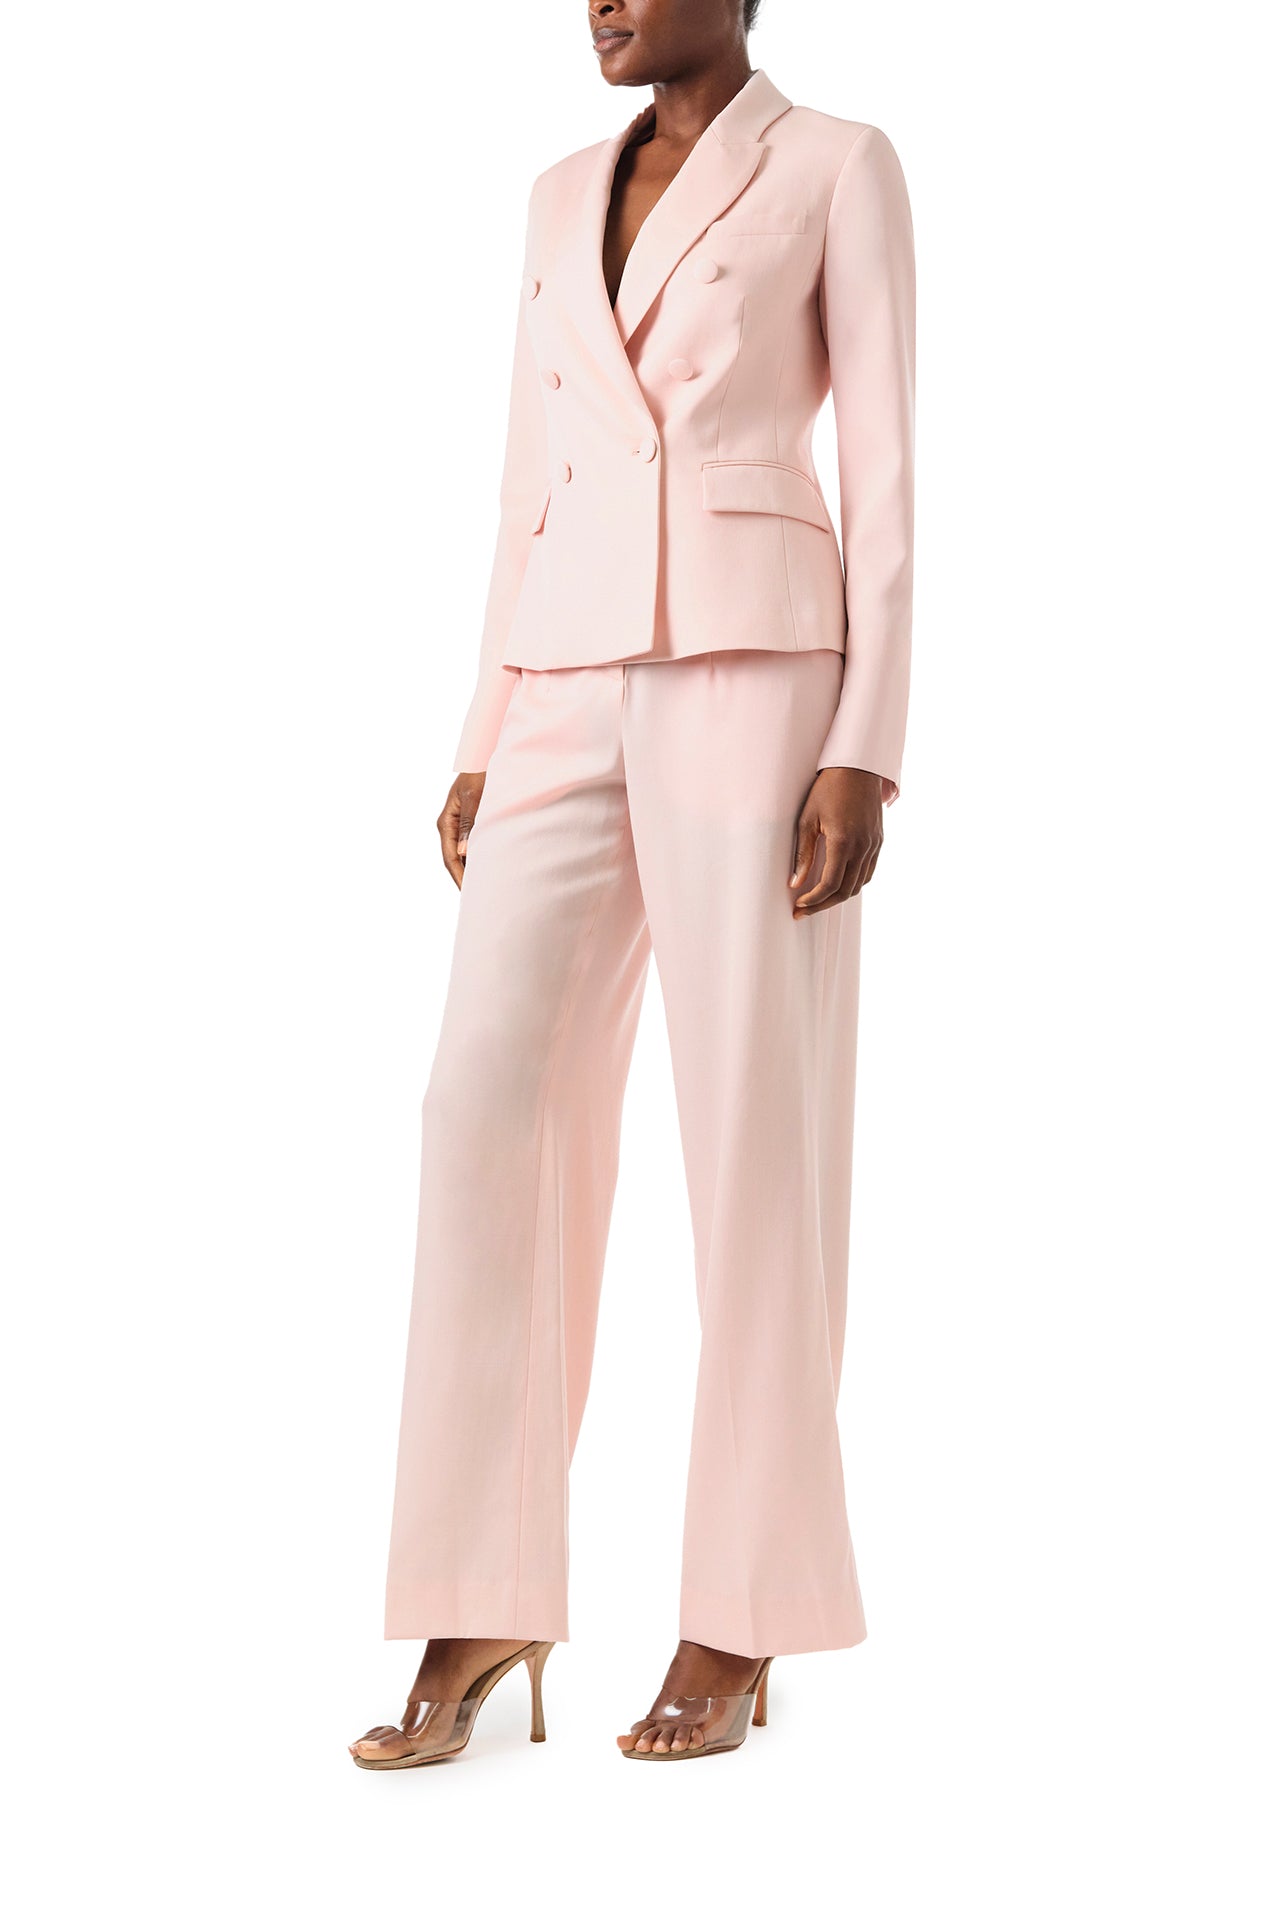 Monique Lhuillier Fall 2024 pale blush wool, double breasted wool blazer with full length sleeve - left side.